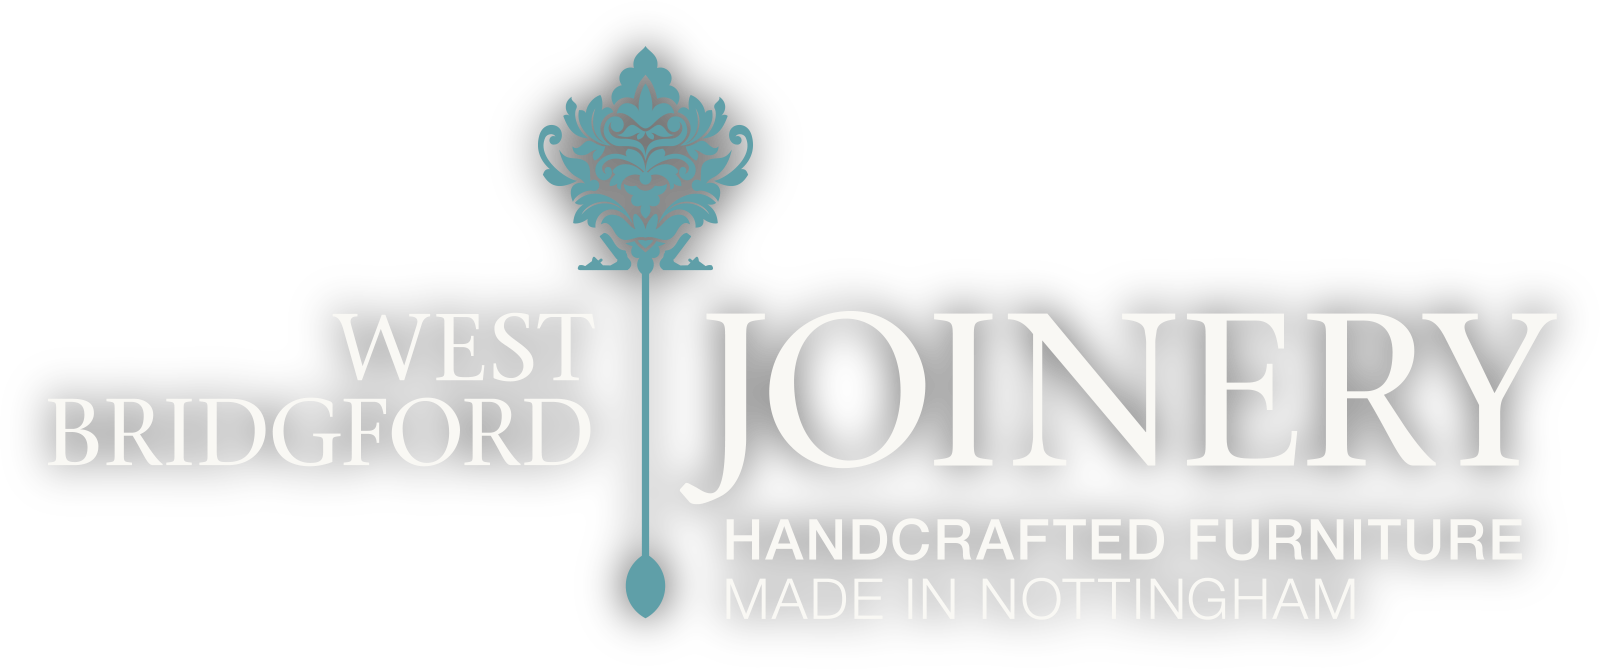 West Bridgford Joinery, Handcrafted Furniture Made In Nottingham